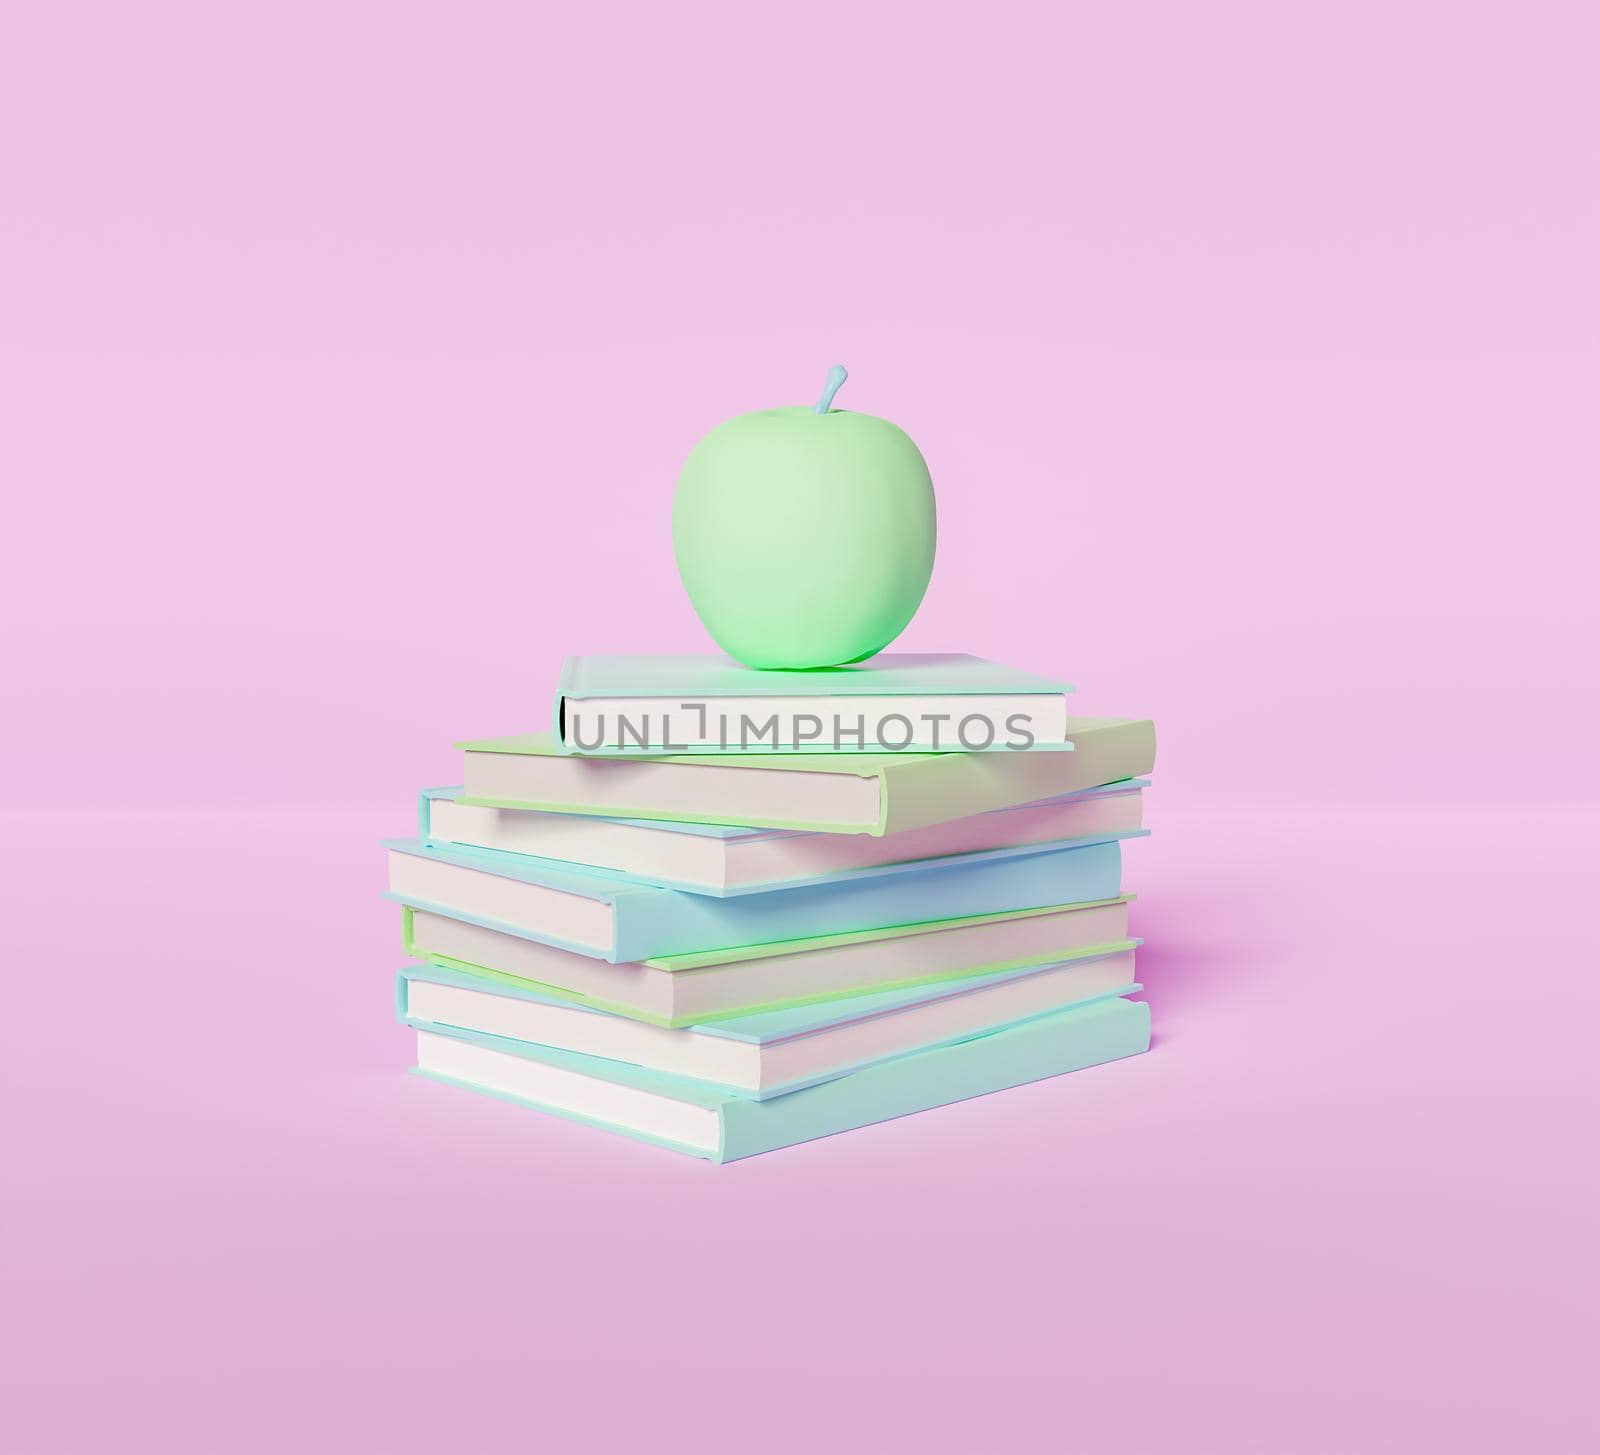 pastel colored stack of books with apple on top. minimalistic pastel colored scene. 3d render